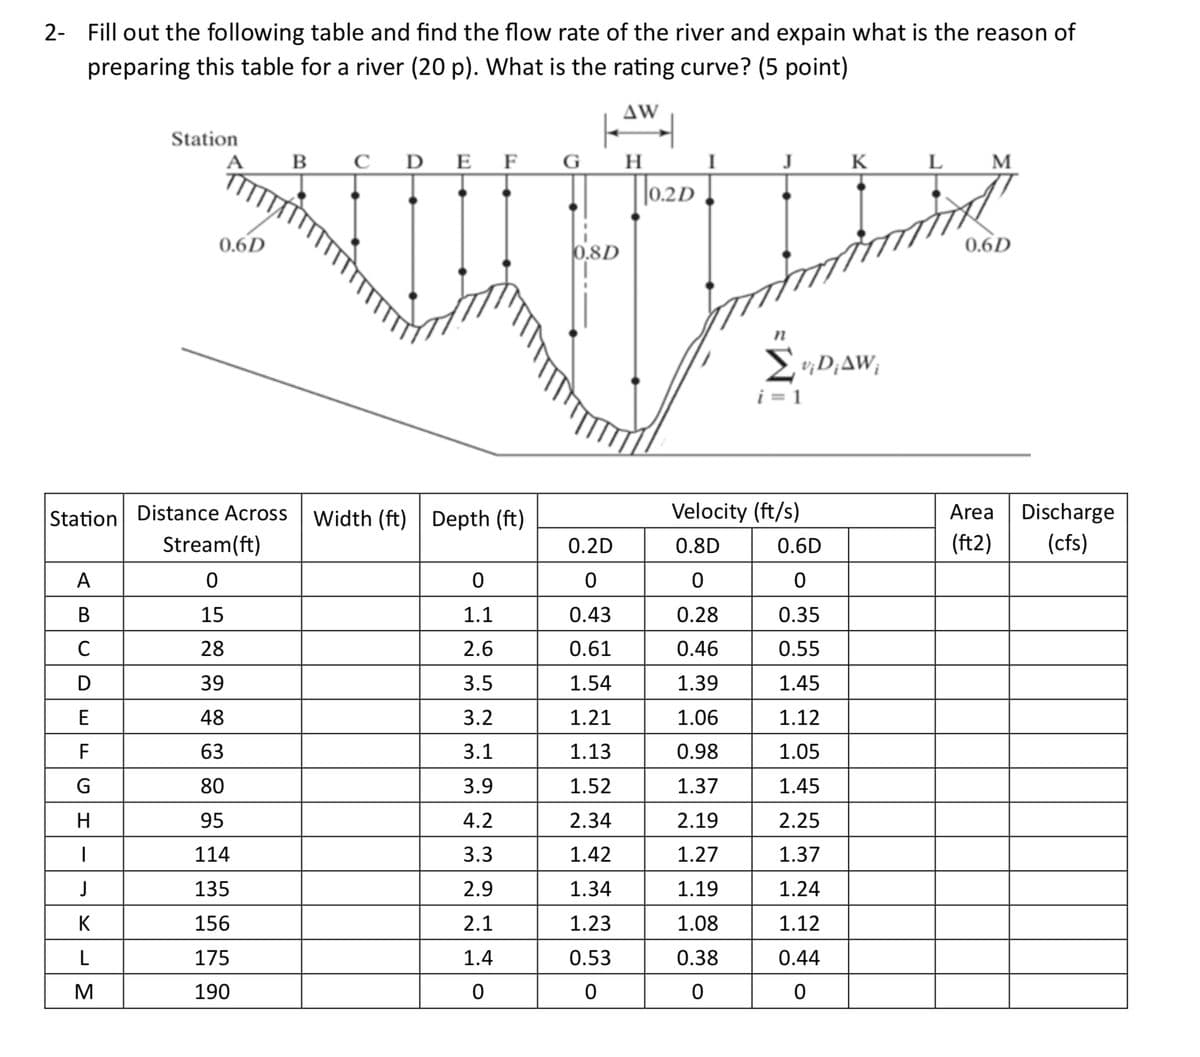 2- Fill out the following table and find the flow rate of the river and expain what is the reason of
preparing this table for a river (20 p). What is the rating curve? (5 point)
Station
B
с
DEF
0.6D
||AW ||
G H
0.8D
0.2D
I
K
L
M
0.6D
SETT32
i=1
Station Distance Across
Stream(ft)
Width (ft) Depth (ft)
Velocity (ft/s)
Area Discharge
0.2D
0.8D
0.6D
(ft2)
(cfs)
A
0
0
0
0
0
B
15
1.1
0.43
0.28
0.35
UD
C
28
2.6
0.61
0.46
0.55
39
3.5
1.54
1.39
1.45
ヨ
48
3.2
1.21
1.06
1.12
F
63
3.1
1.13
0.98
1.05
G
80
3.9
1.52
1.37
1.45
H
95
4.2
2.34
2.19
2.25
|
114
3.3
1.42
1.27
1.37
J
135
2.9
1.34
1.19
1.24
K
156
2.1
1.23
1.08
1.12
L
175
1.4
0.53
0.38
0.44
M
190
0
0
0
0